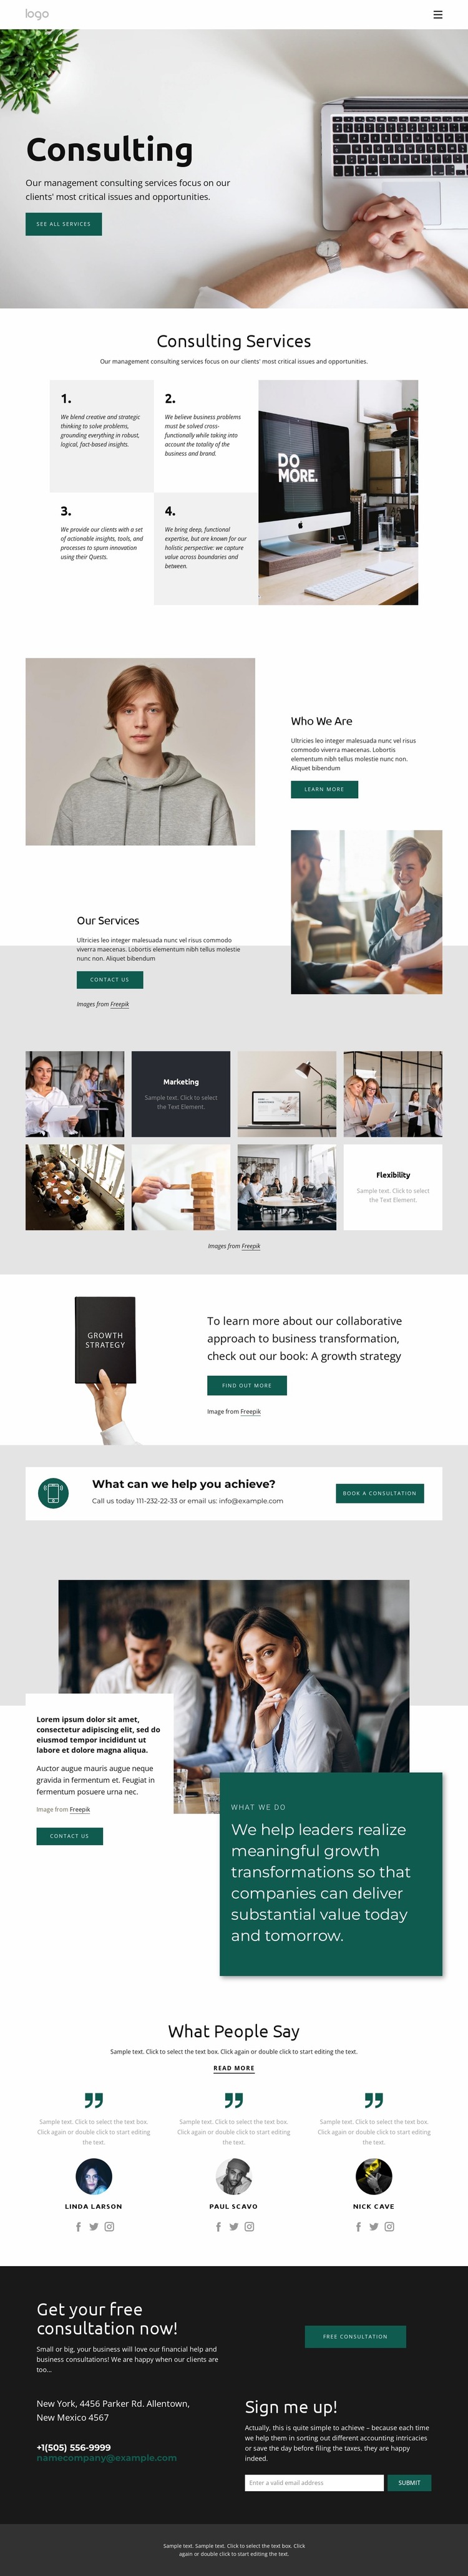 Business consultant company Website Mockup